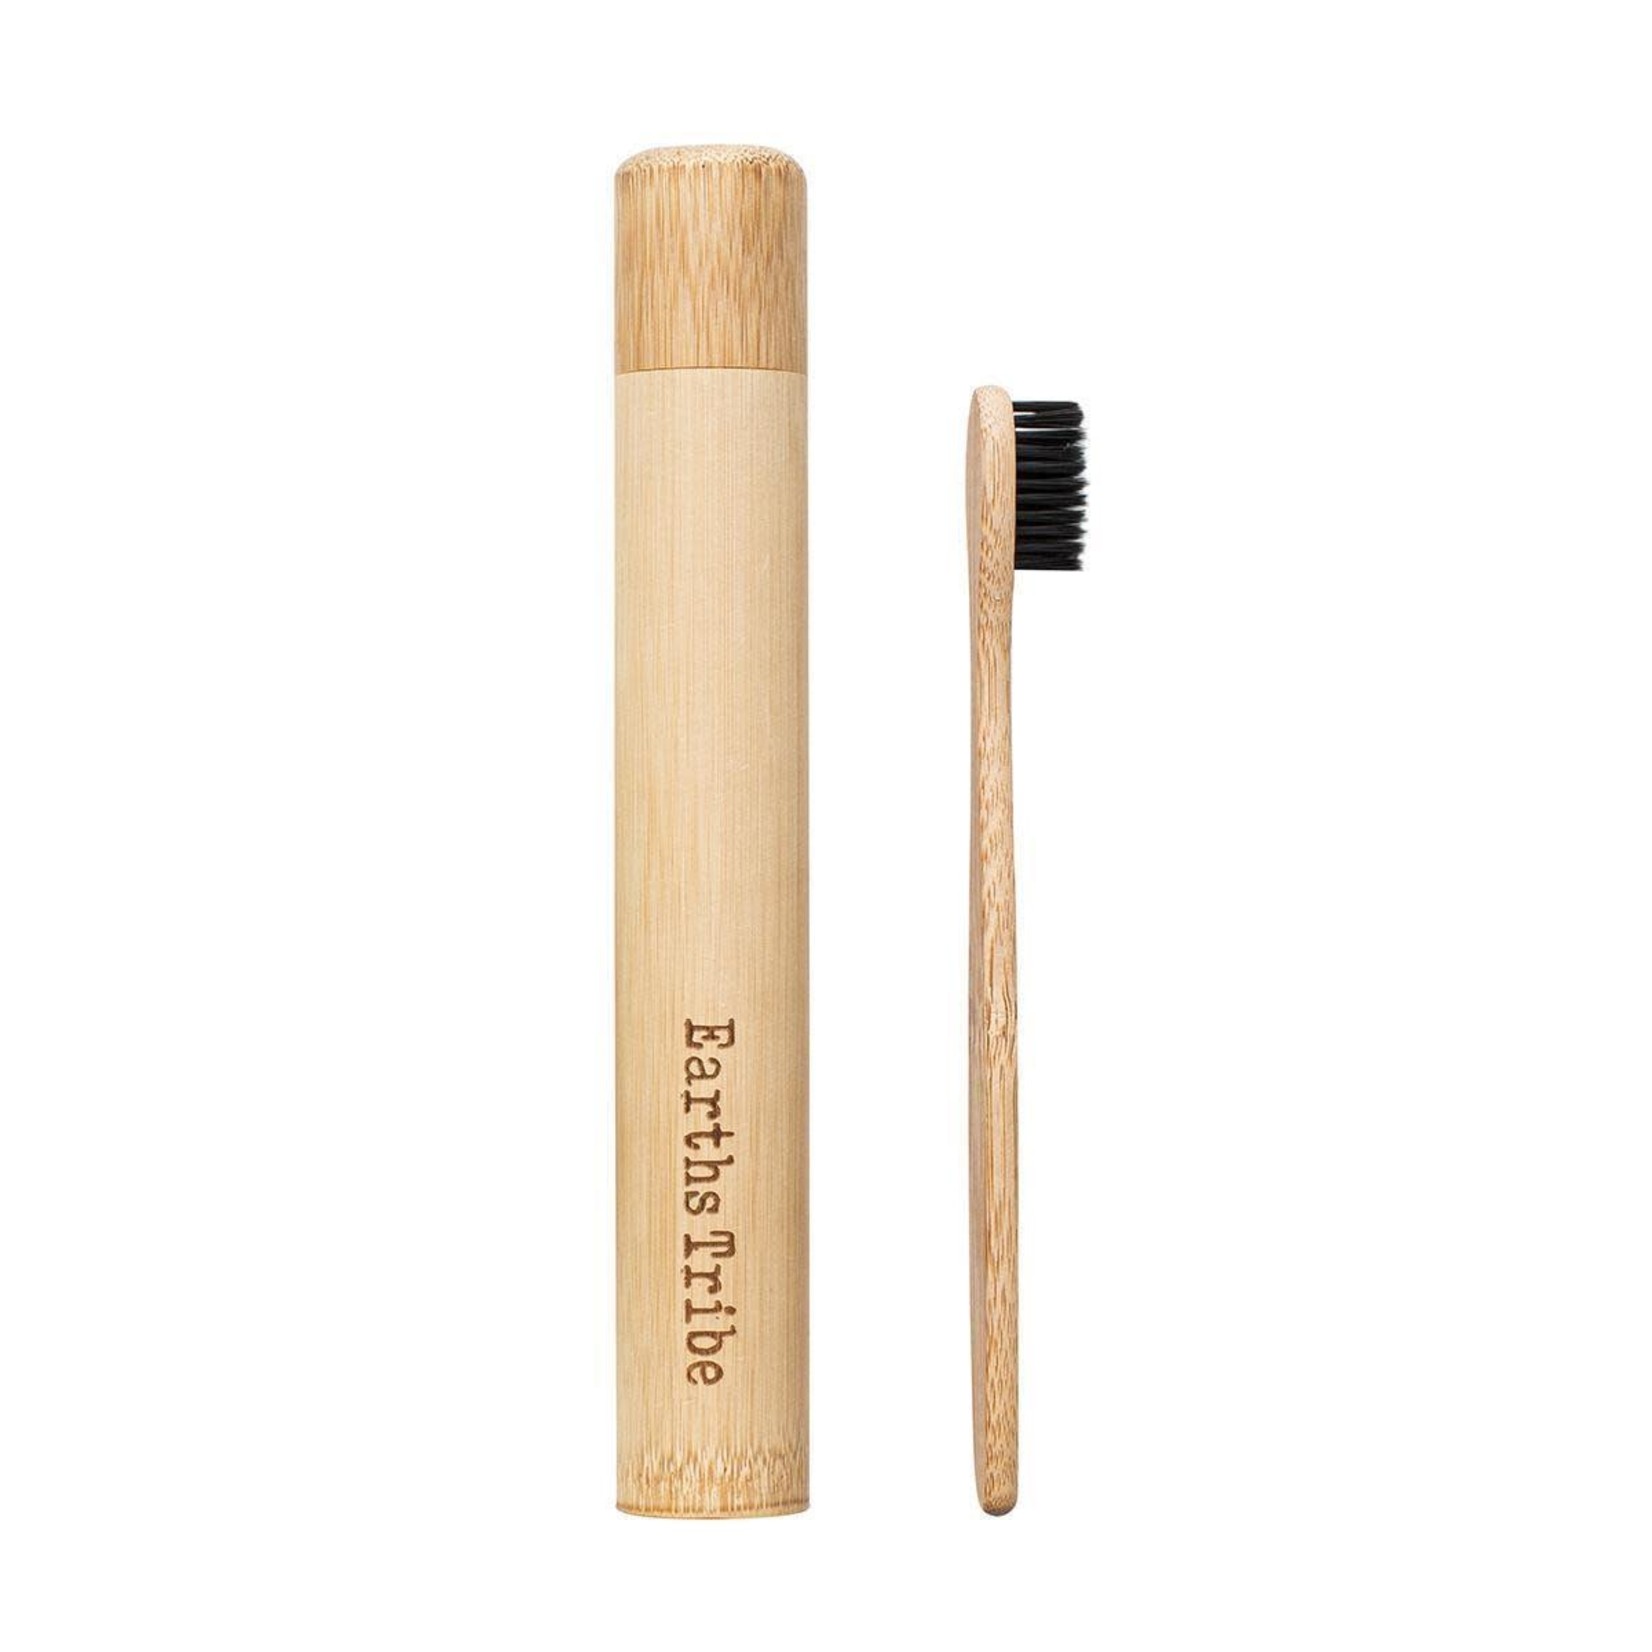 Earths Tribe Bamboo Toothbrush Case Earths Tribe